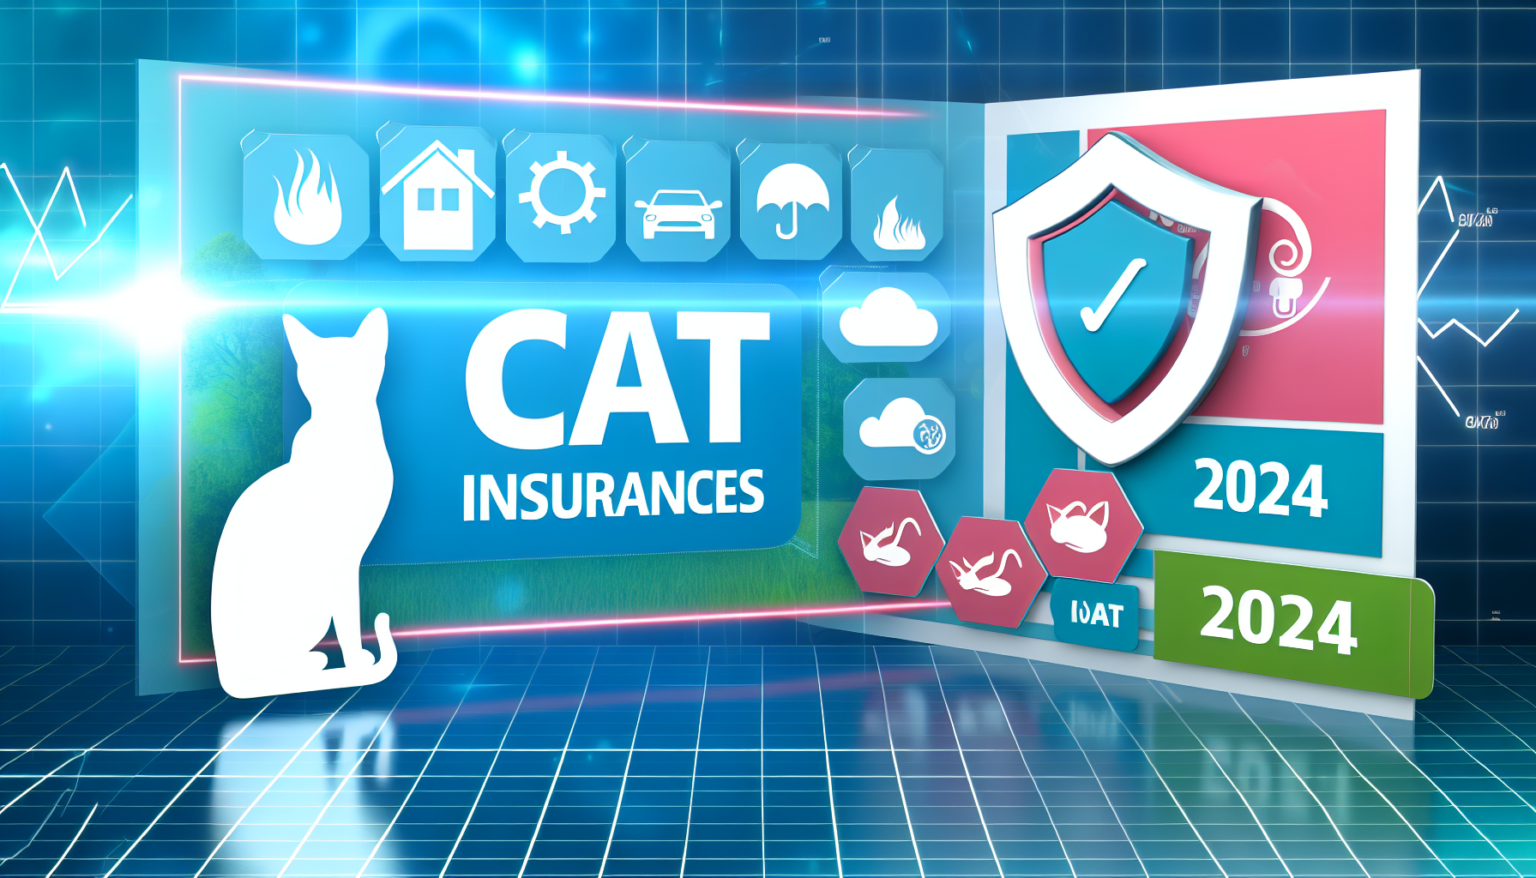 Pawtounes - Chats - Chatons - Animaux - Mignons - Marrants : Comparatif 2024 : Which cat insurance company should you choose?